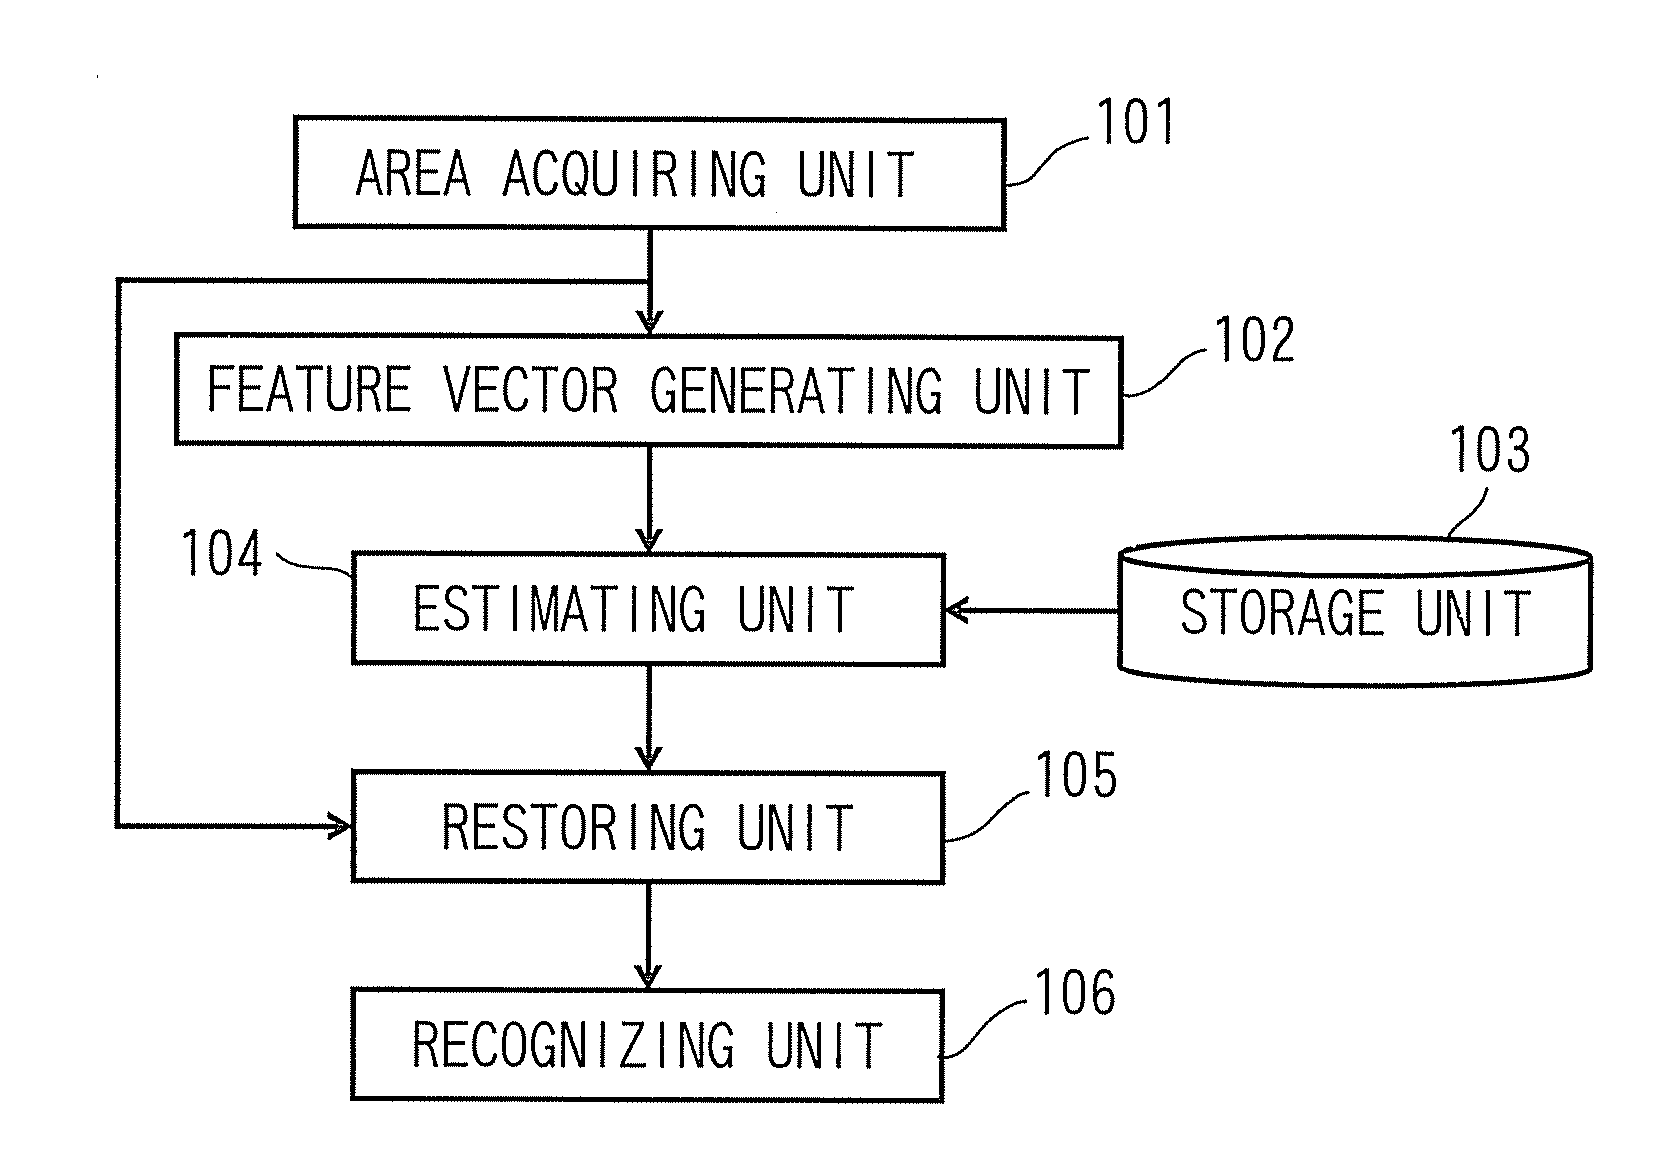 Object recognizing apparatus and method